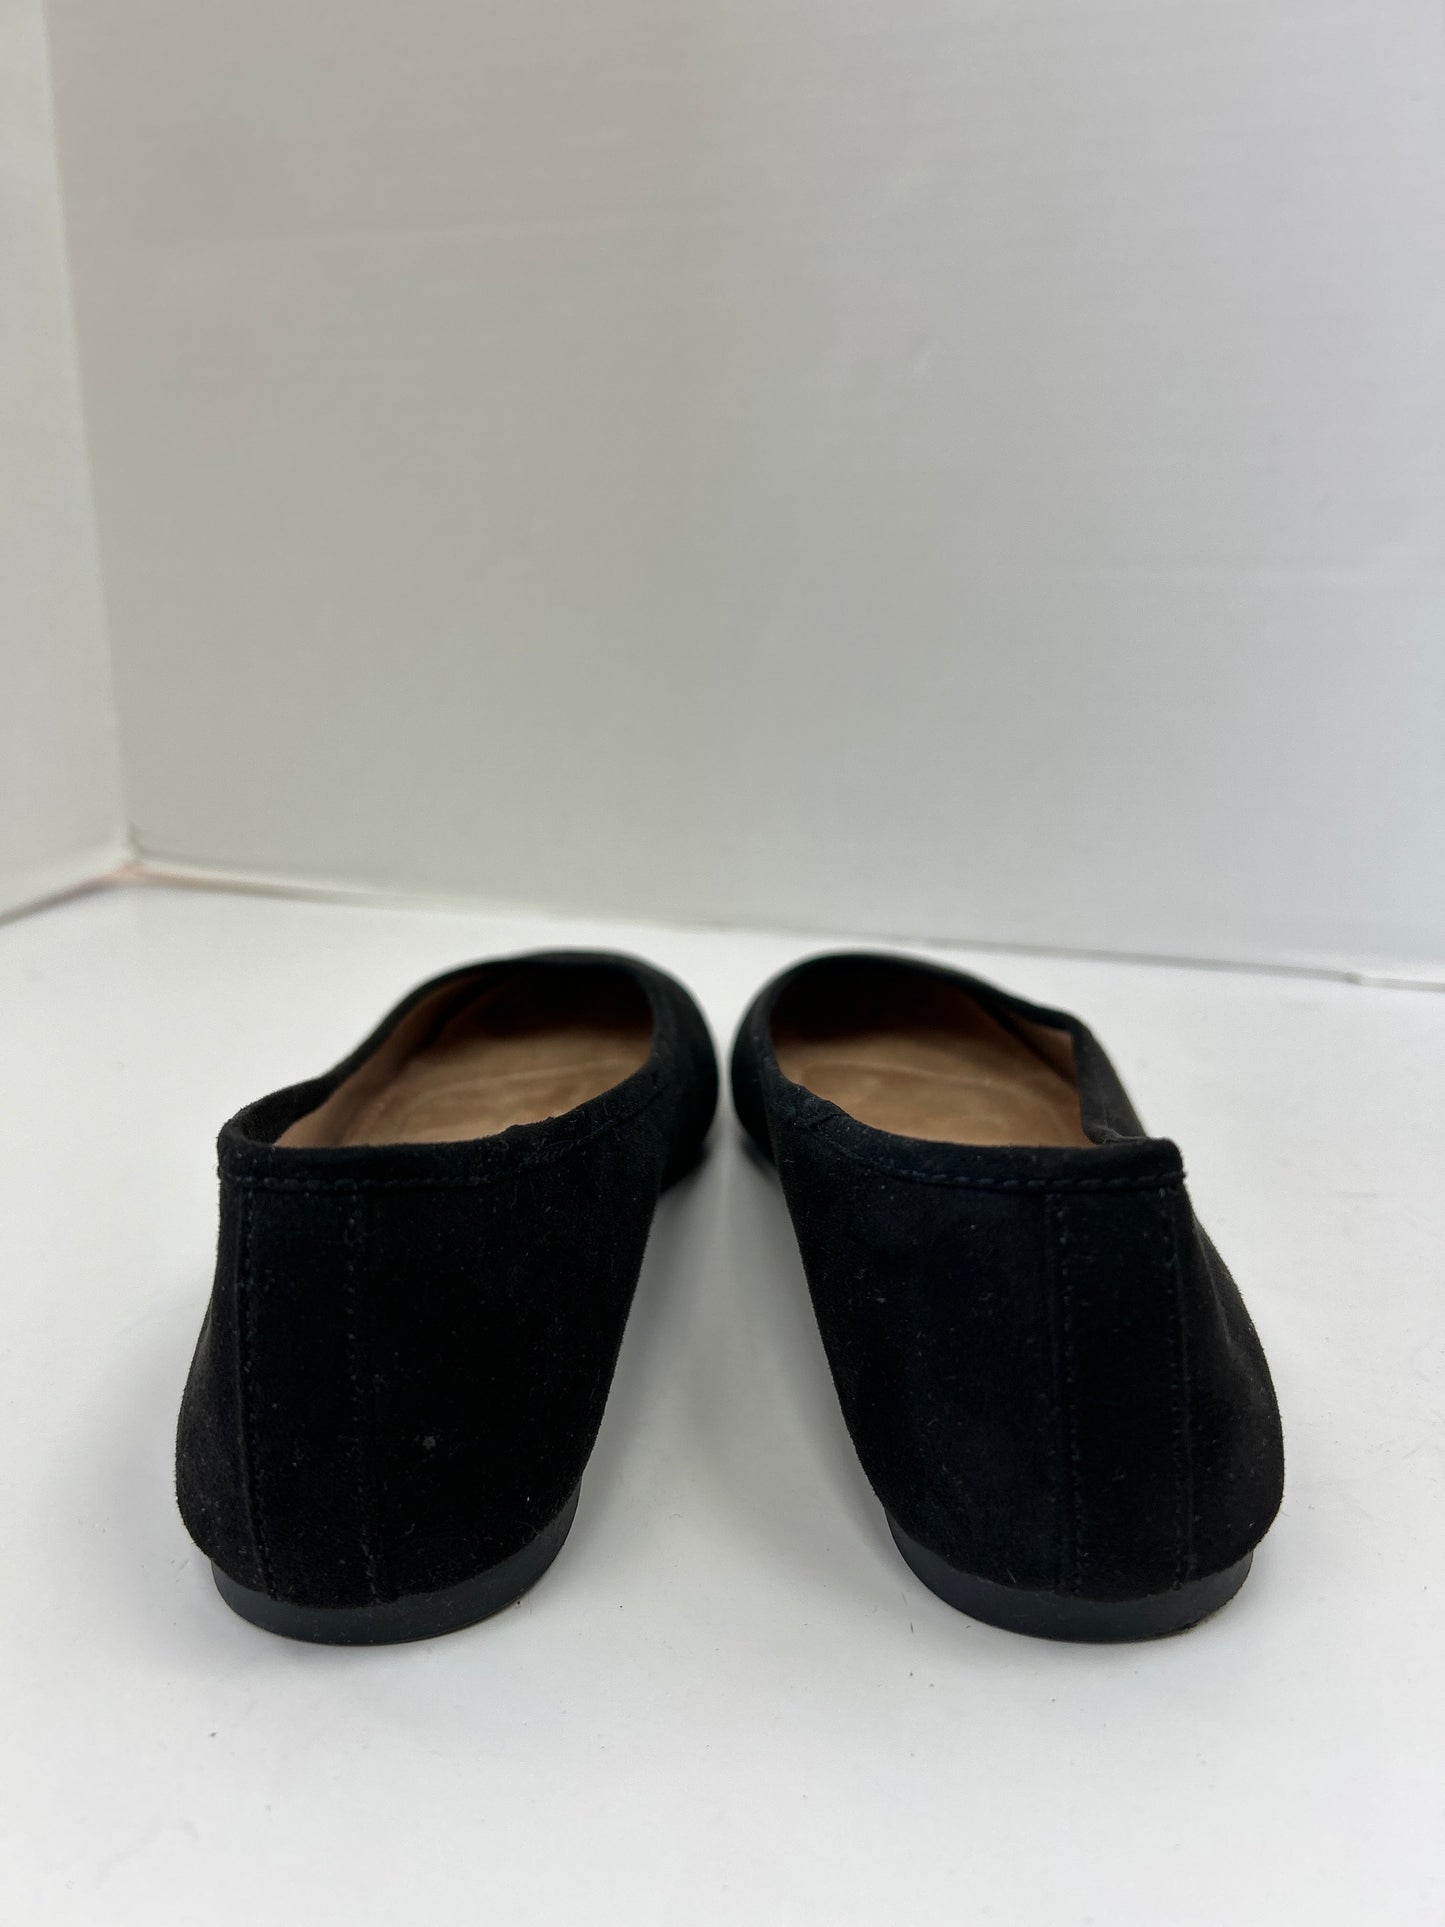 Shoes Flats By Old Navy  Size: 6